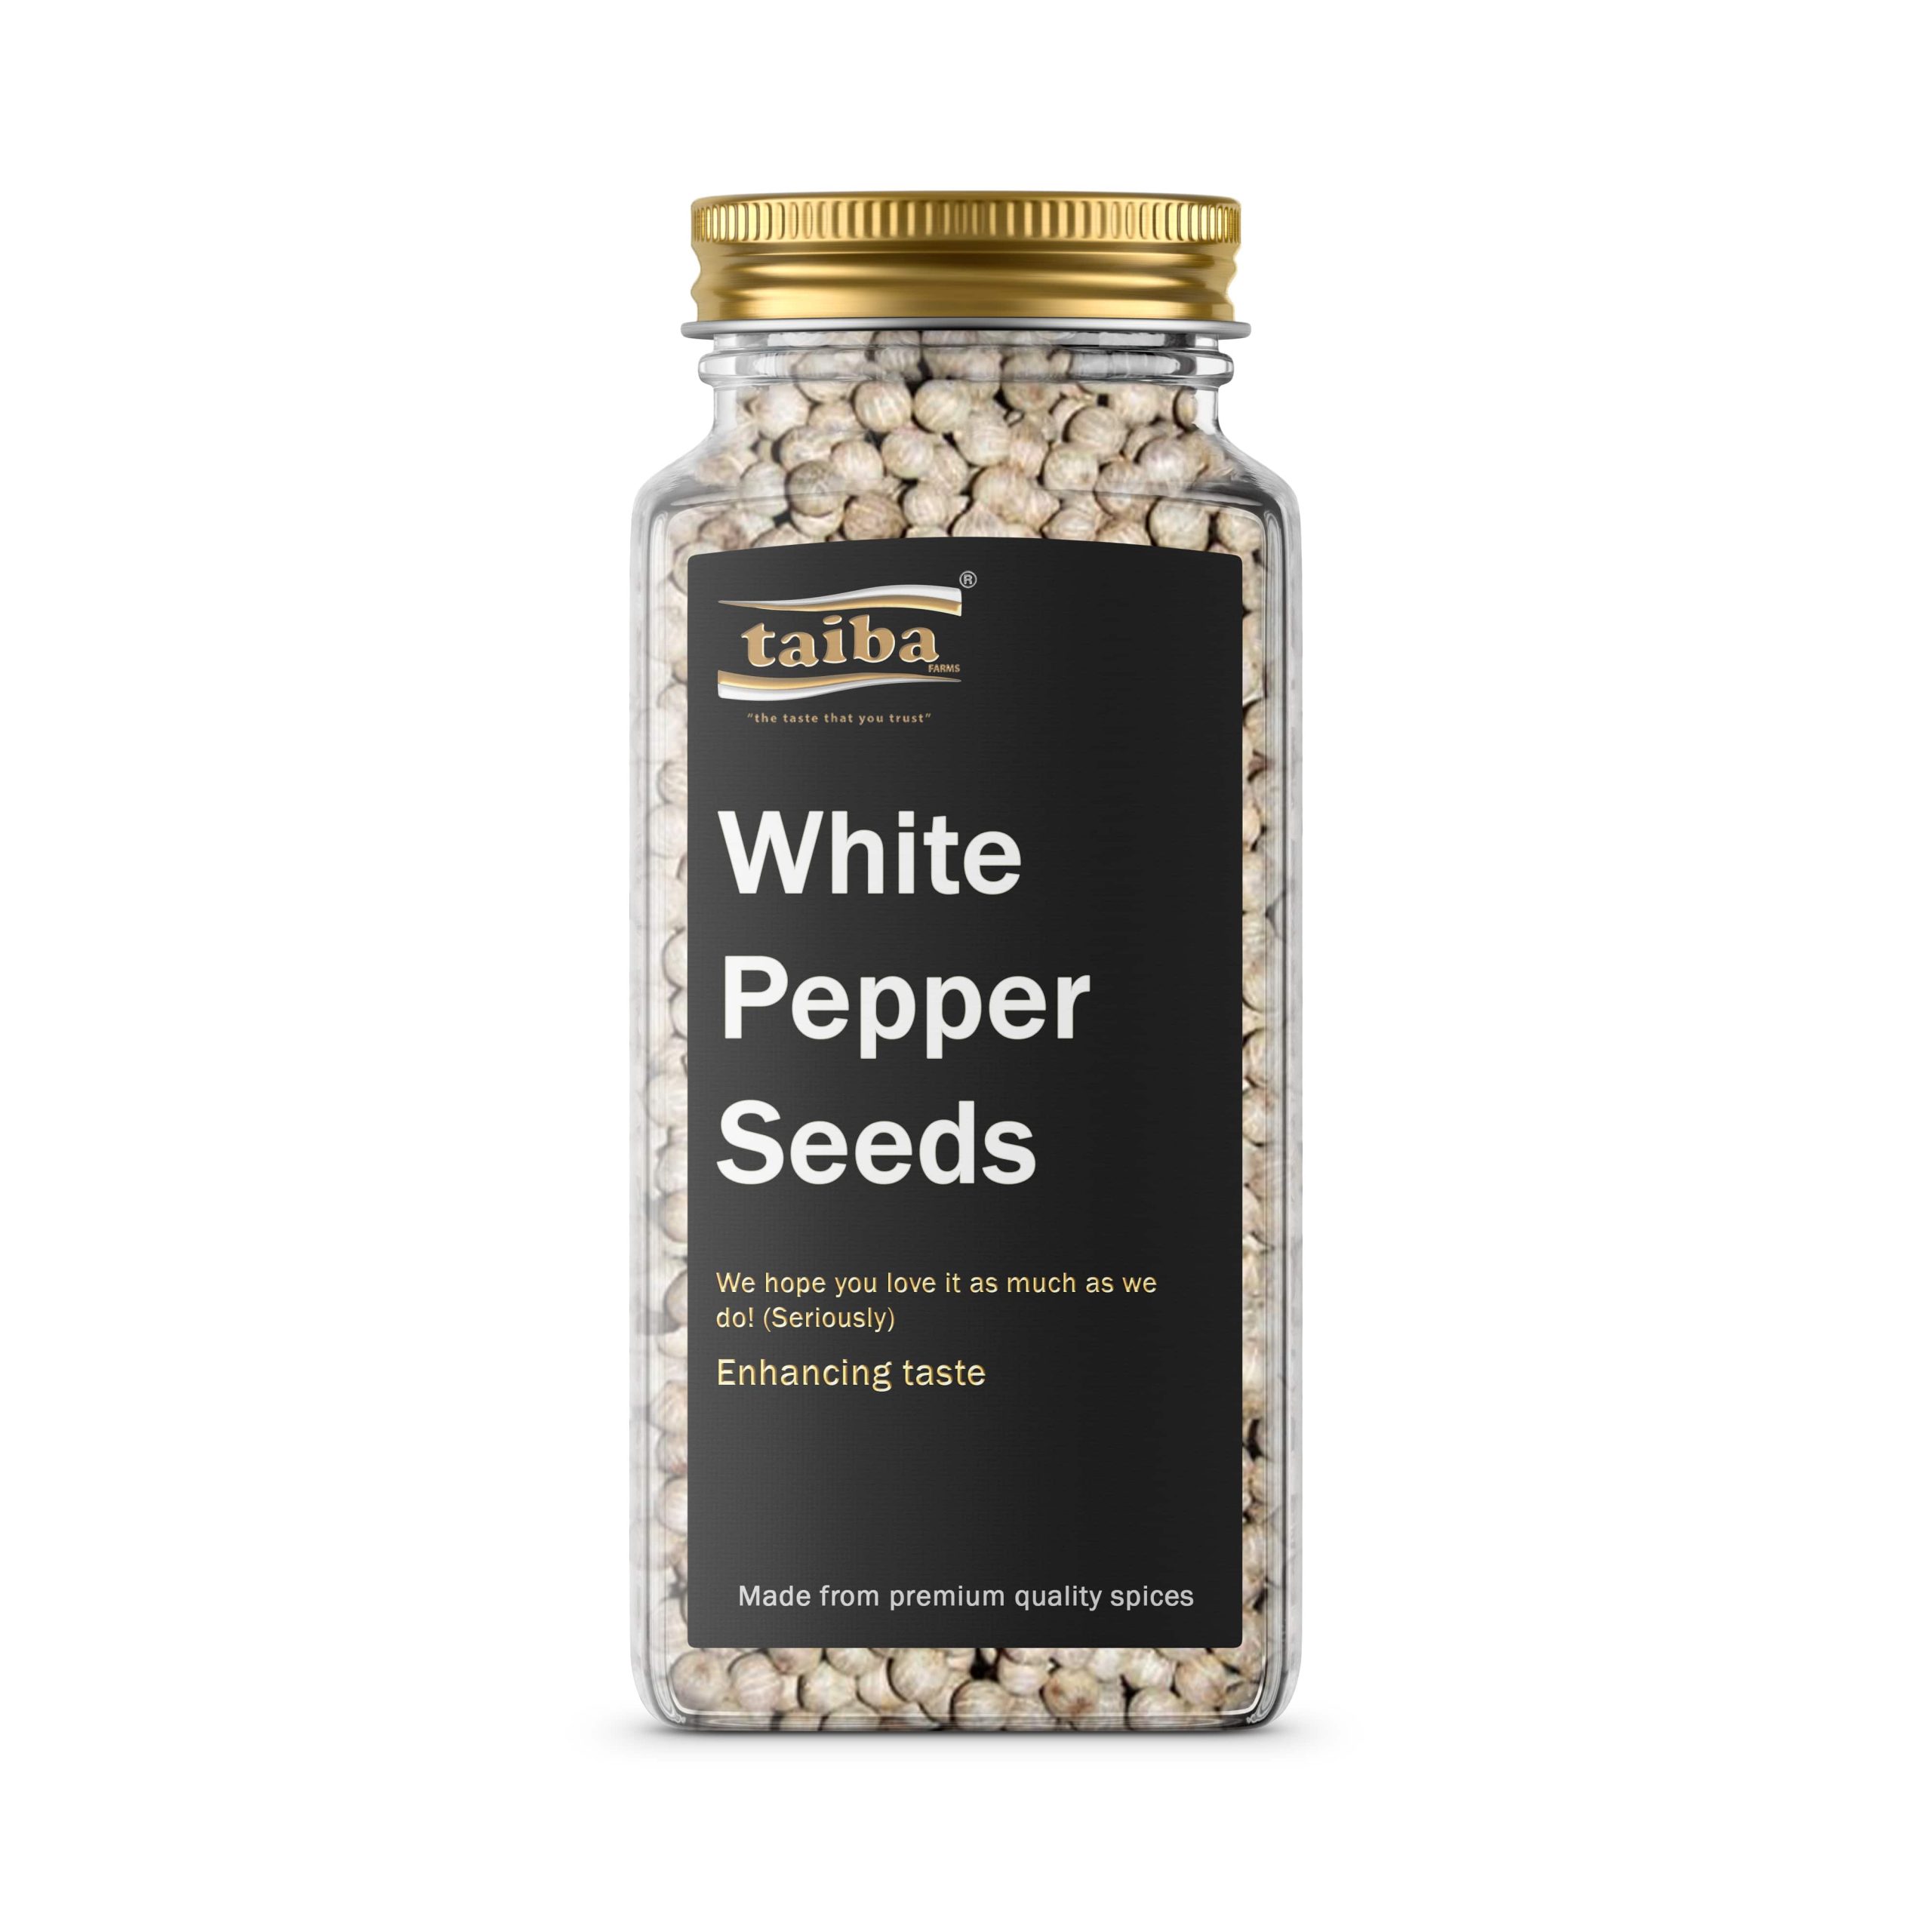 White-Pepper-online-grocery-hearps-and-spices-online-home-delivery-in-UAE-Dubai-Abu-Dhabi-and-Sharjah-online-spices-suppliers-saudi-arabia-UAE-Brazil